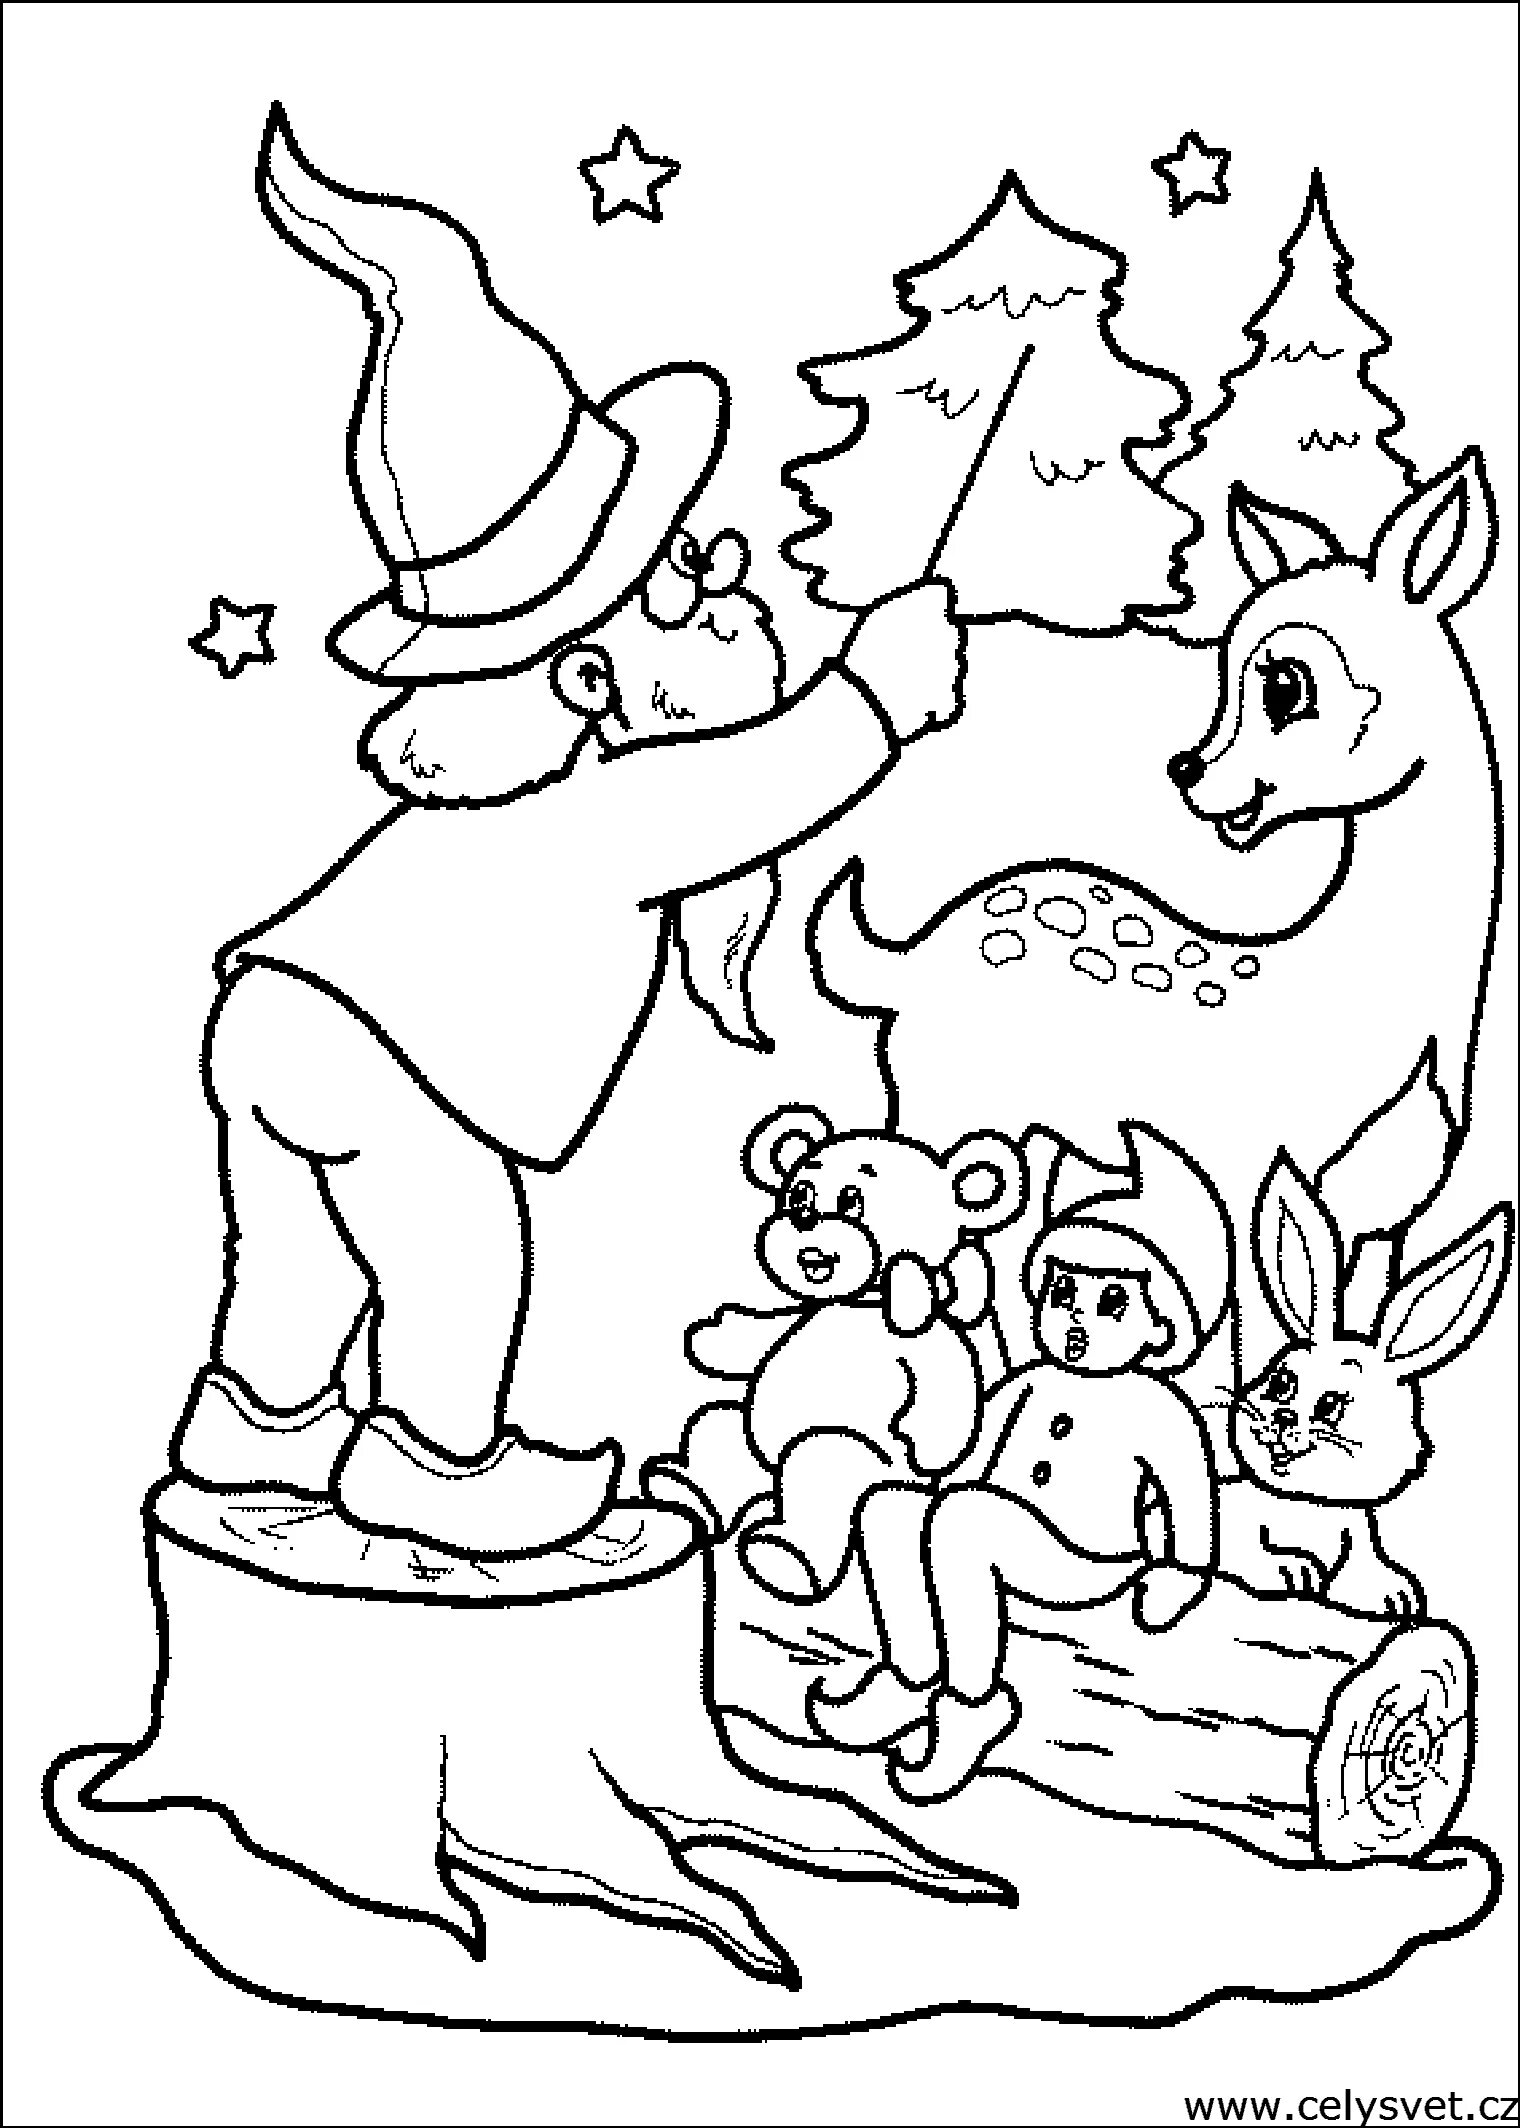 Luxury Christmas miracle coloring book